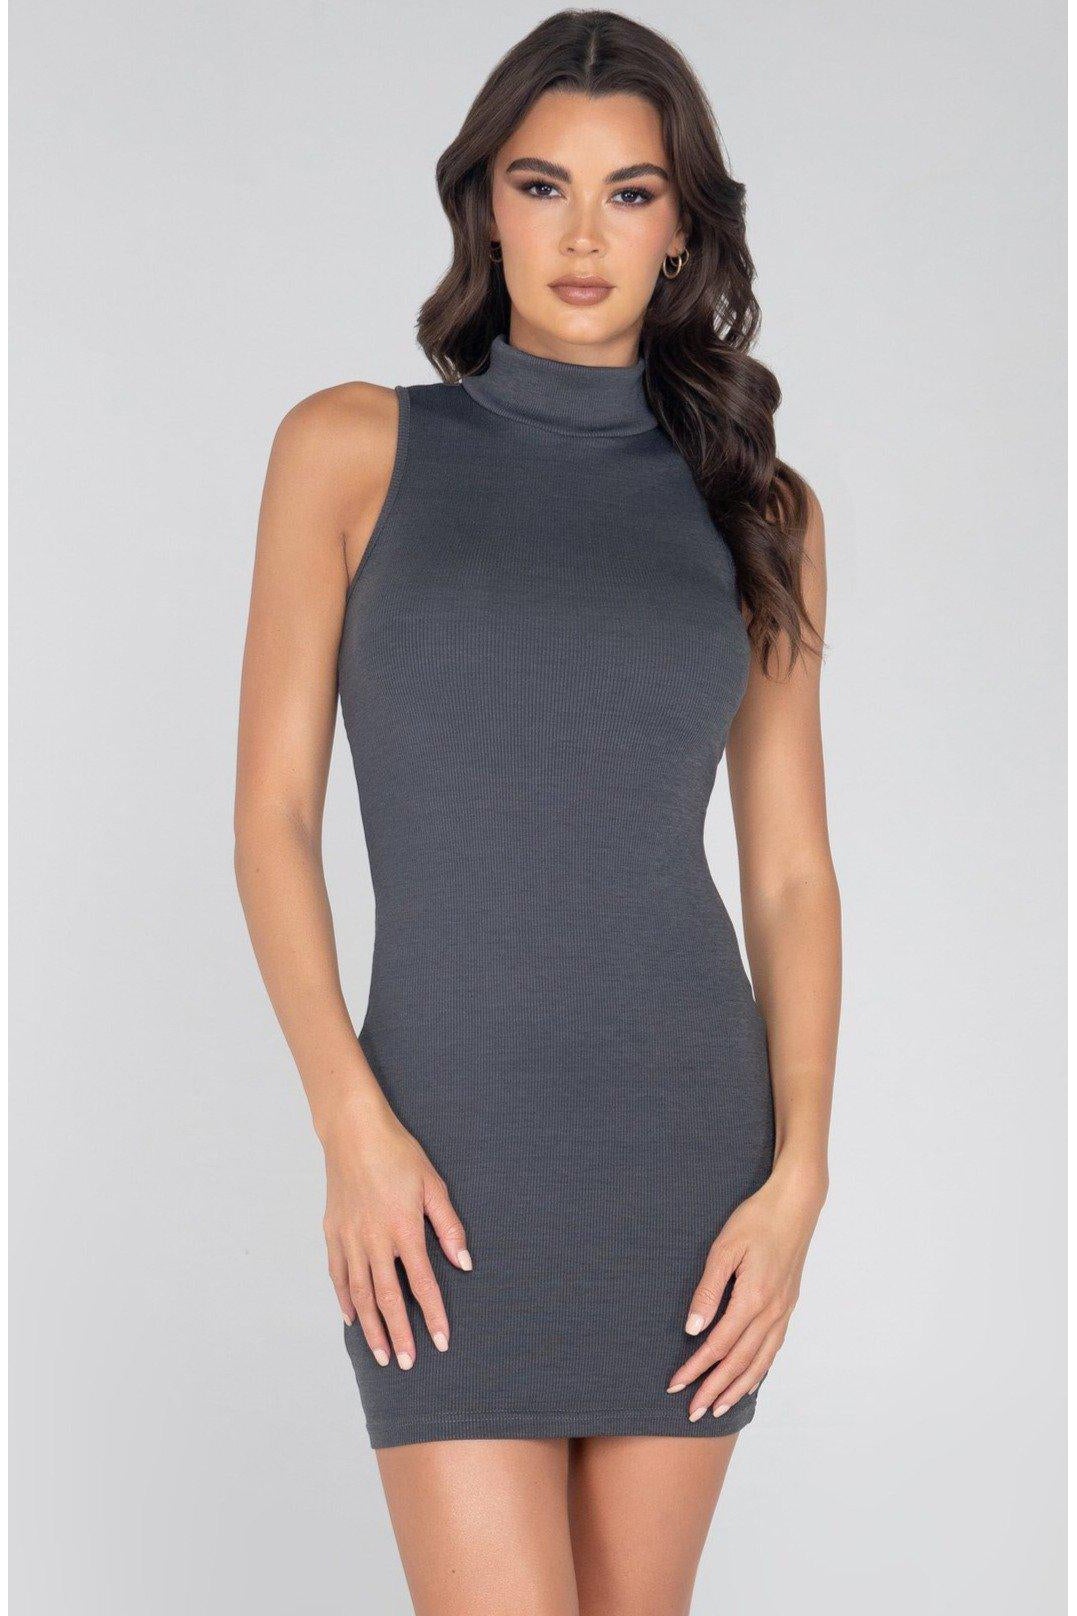 Ribbed Turtle Neck Sleeveless Dress-Club Dresses-Roma Confidential-Grey-L-SEXYSHOES.COM